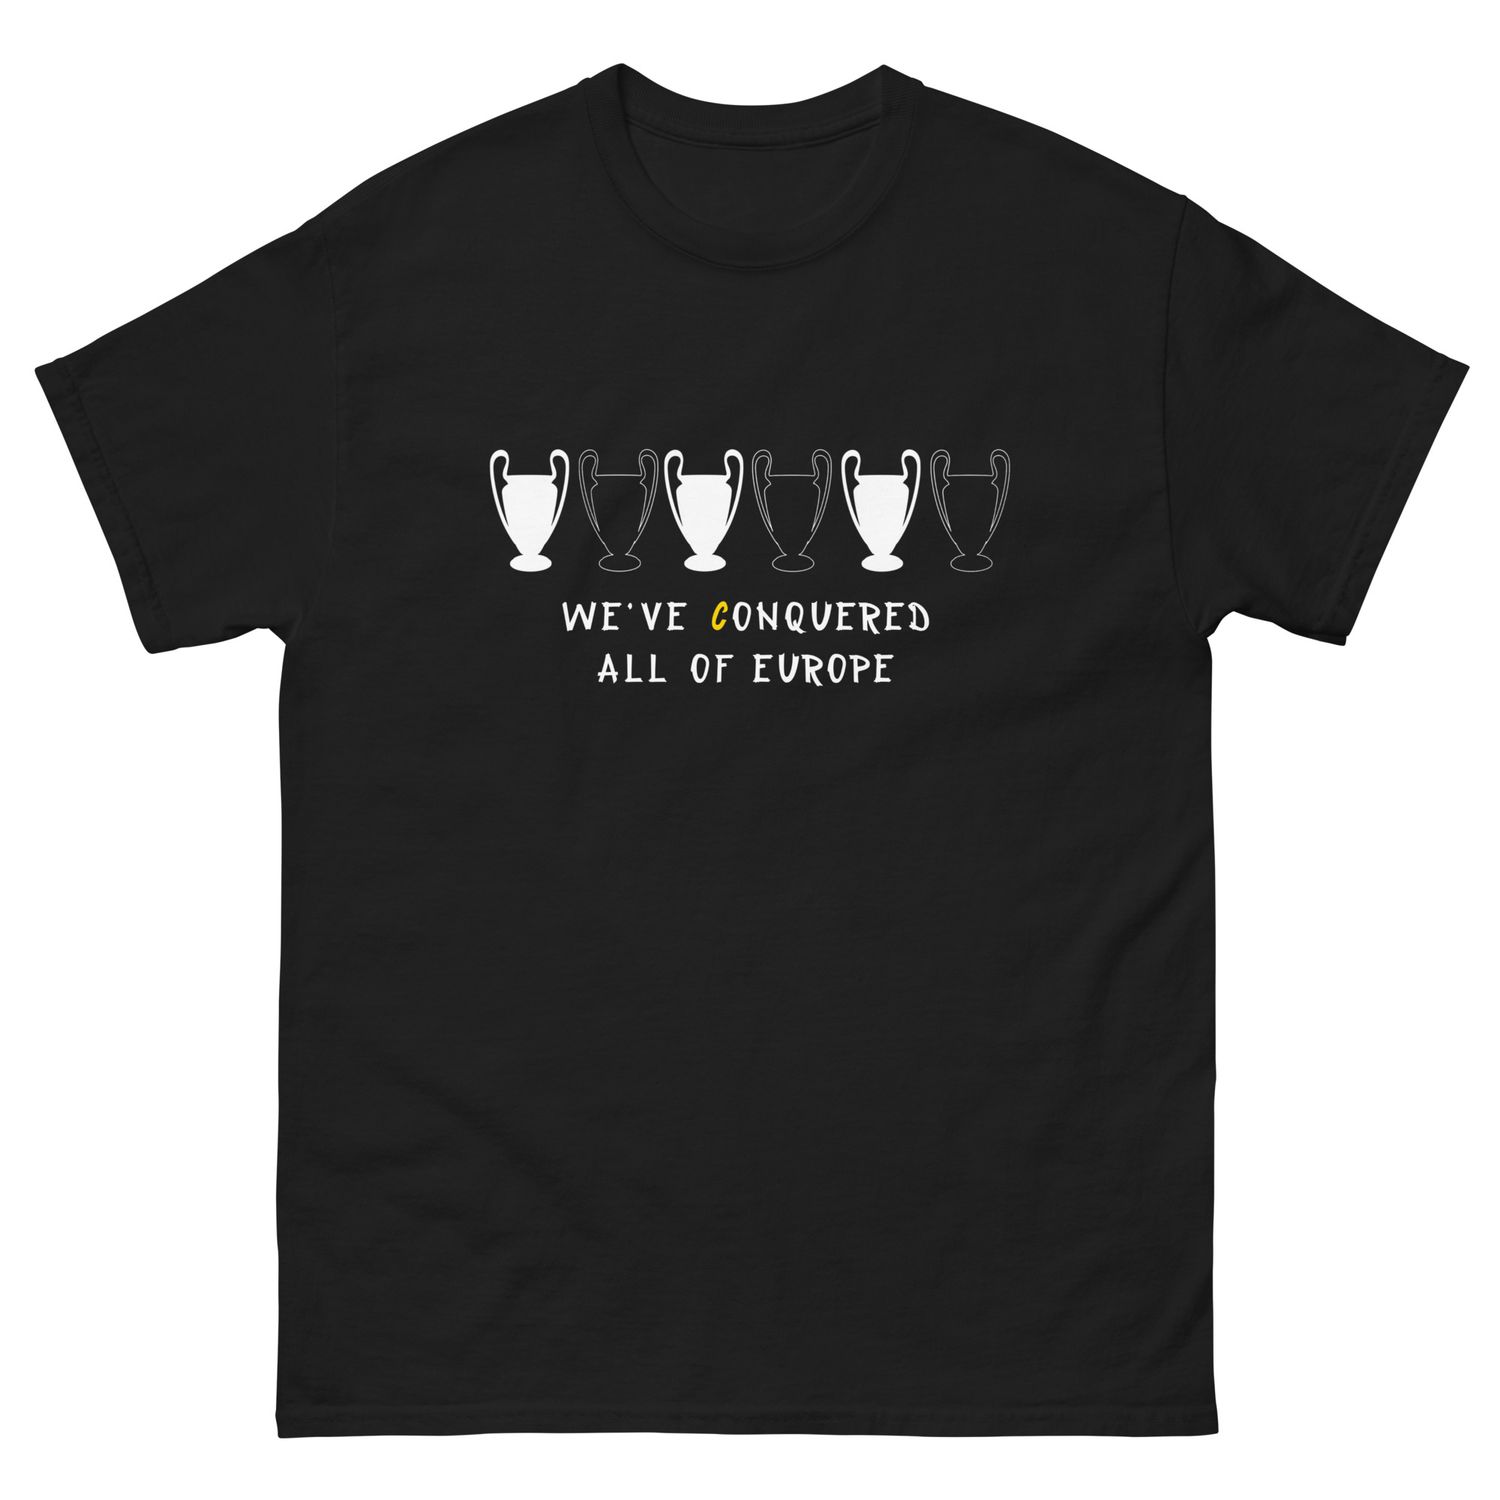 We’ve Conquered all of Europe tee